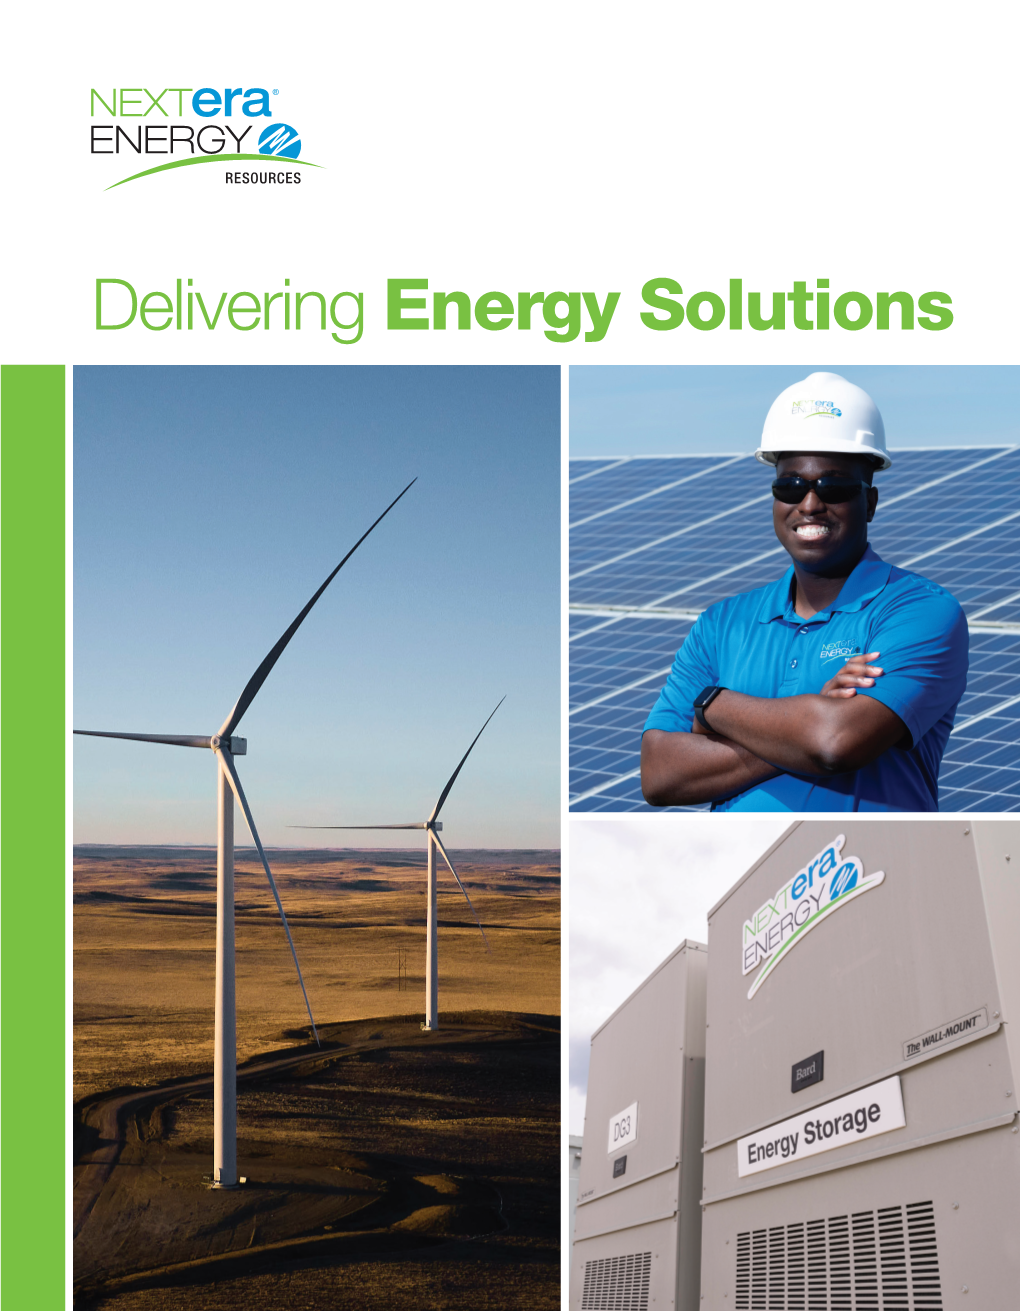 Delivering Energy Solutions Meeting Energy Needs